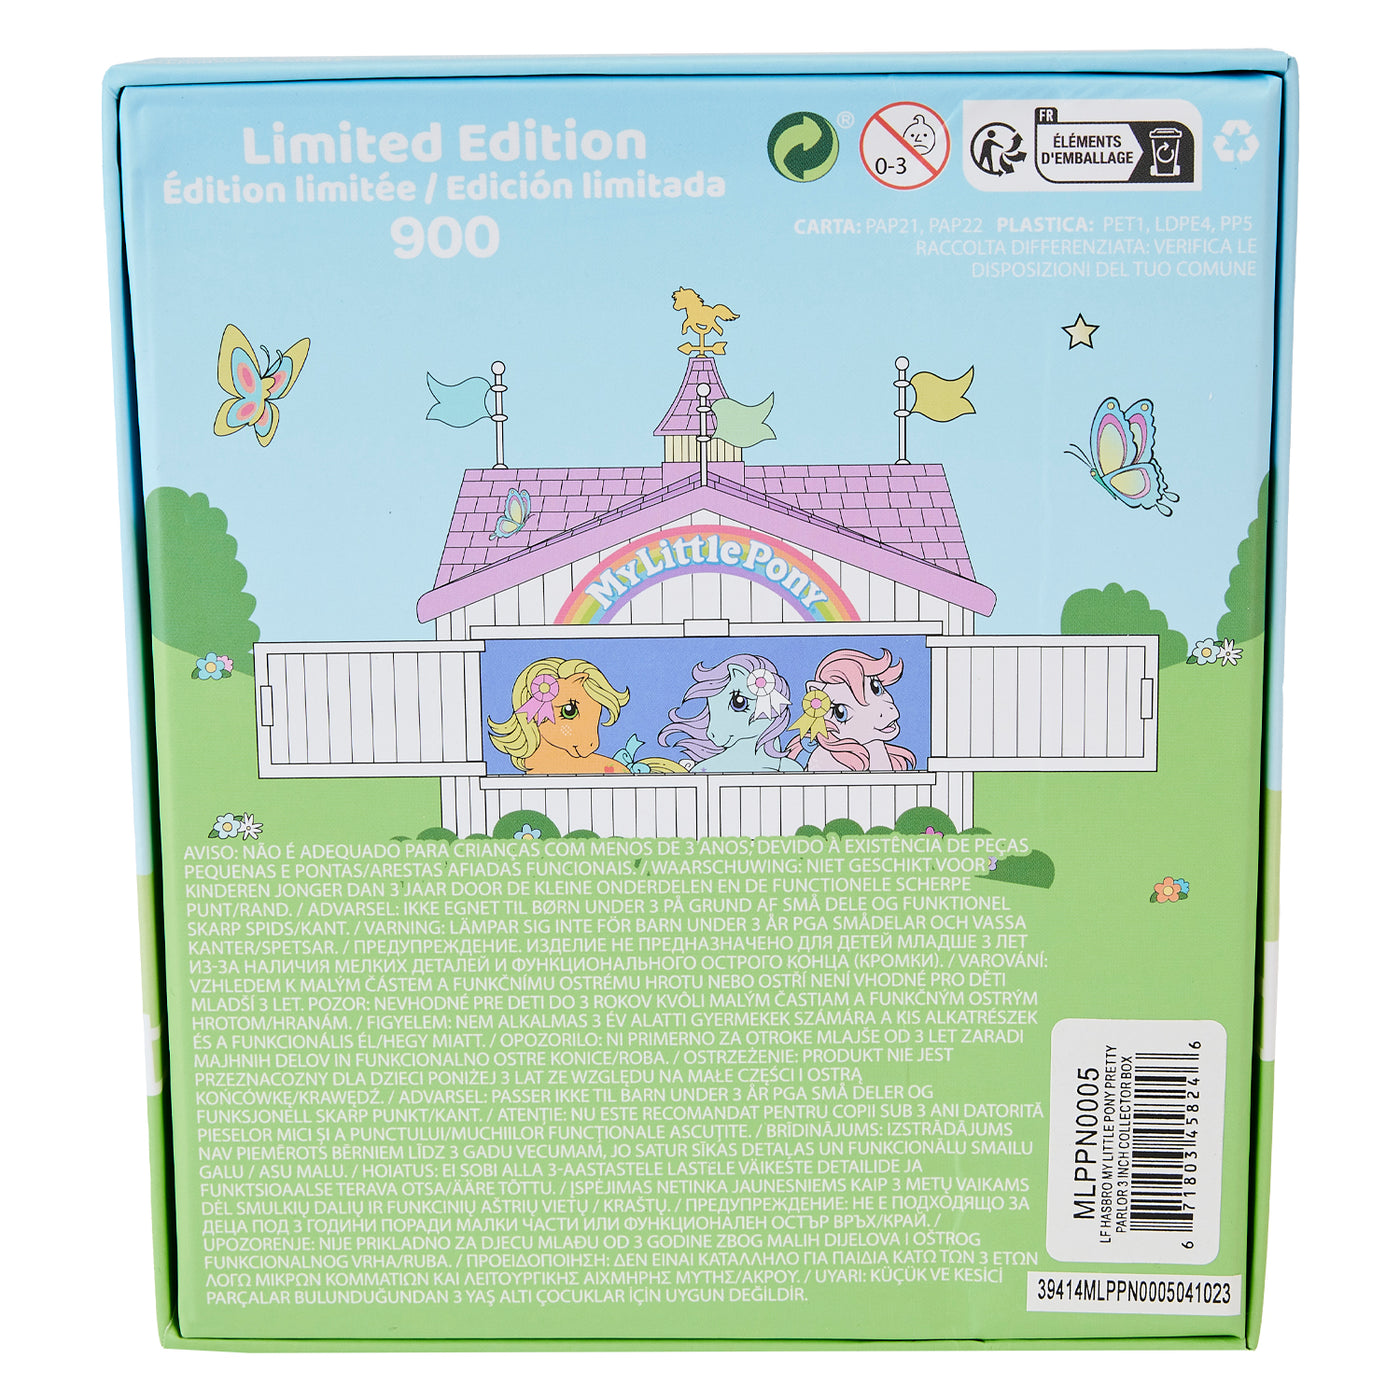 Hasbro My Little Pony 40th Anniversary Pretty Parlor 3" Collector Box Limited Edition Pin